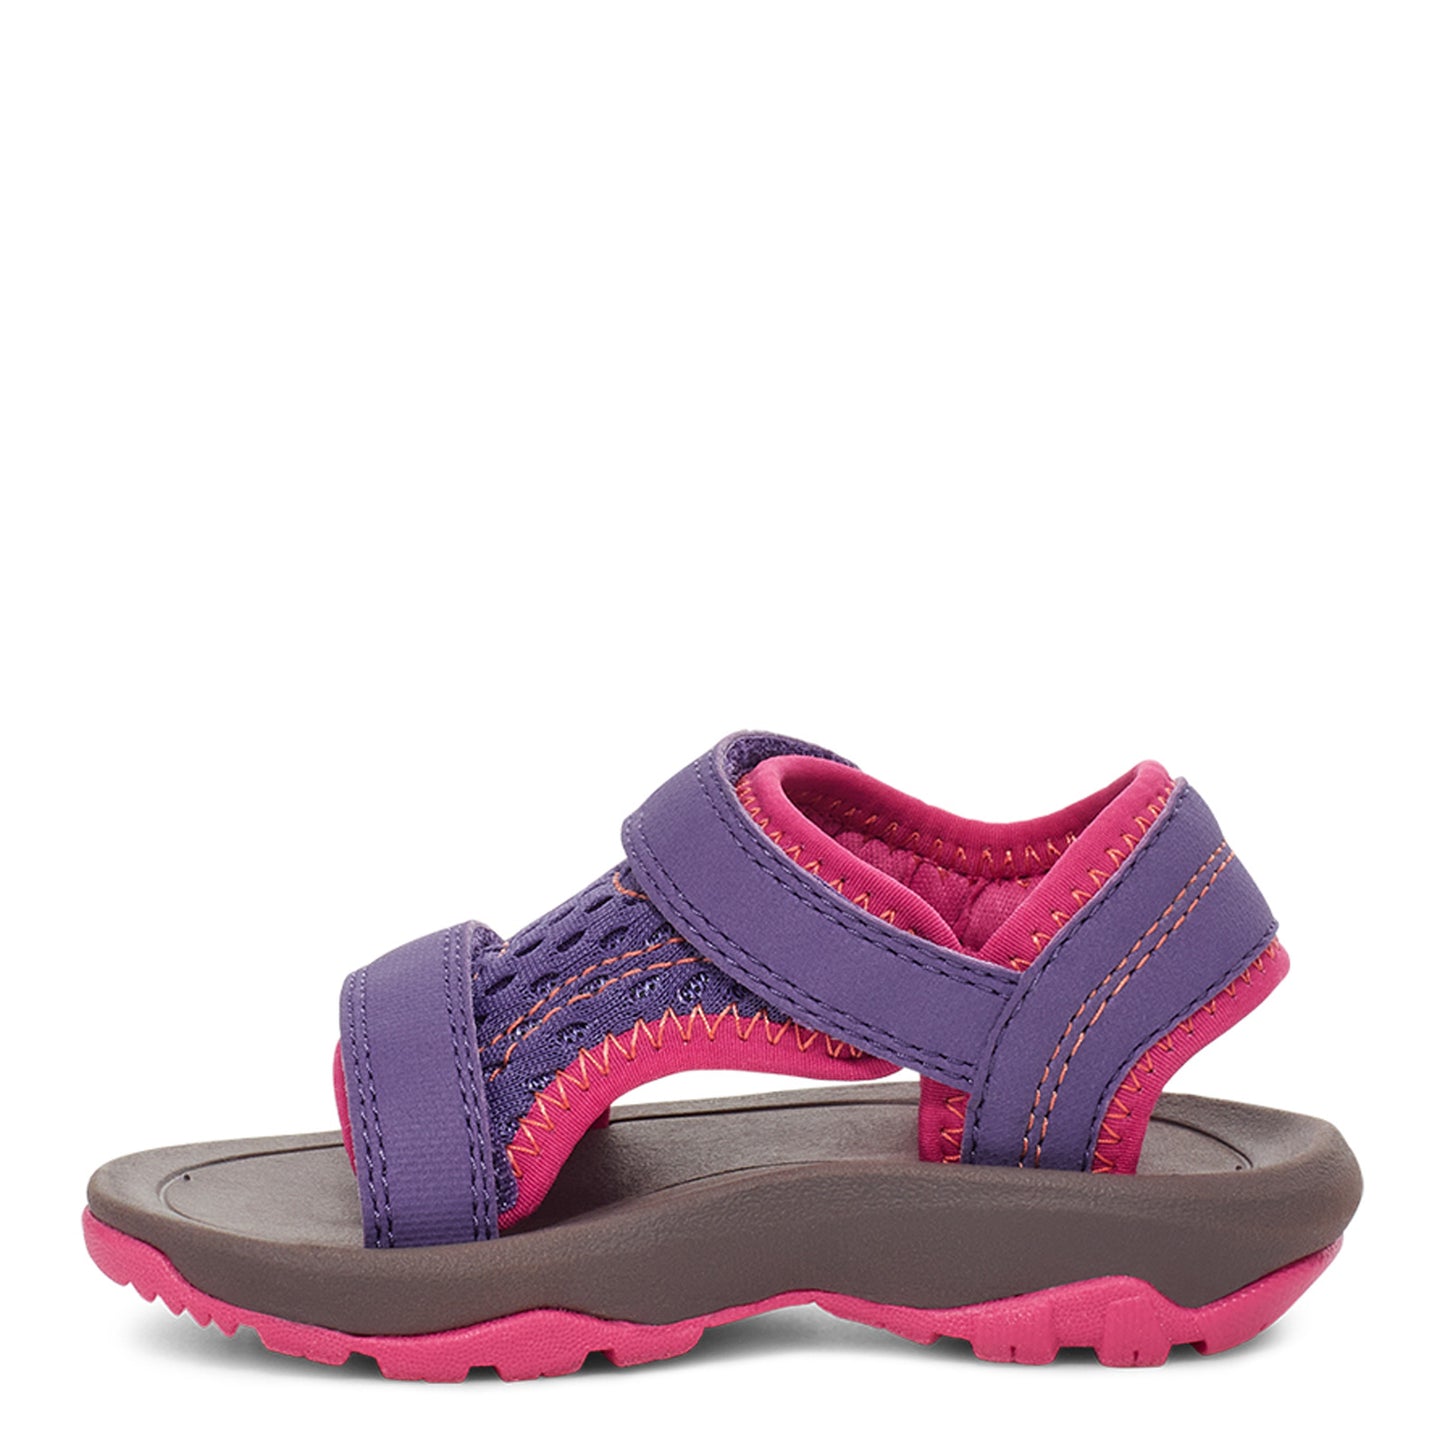 Peltz Shoes  Baby Girl's Teva Psyclone XLT - Toddler Imperial Palace 1019538T-IPLC